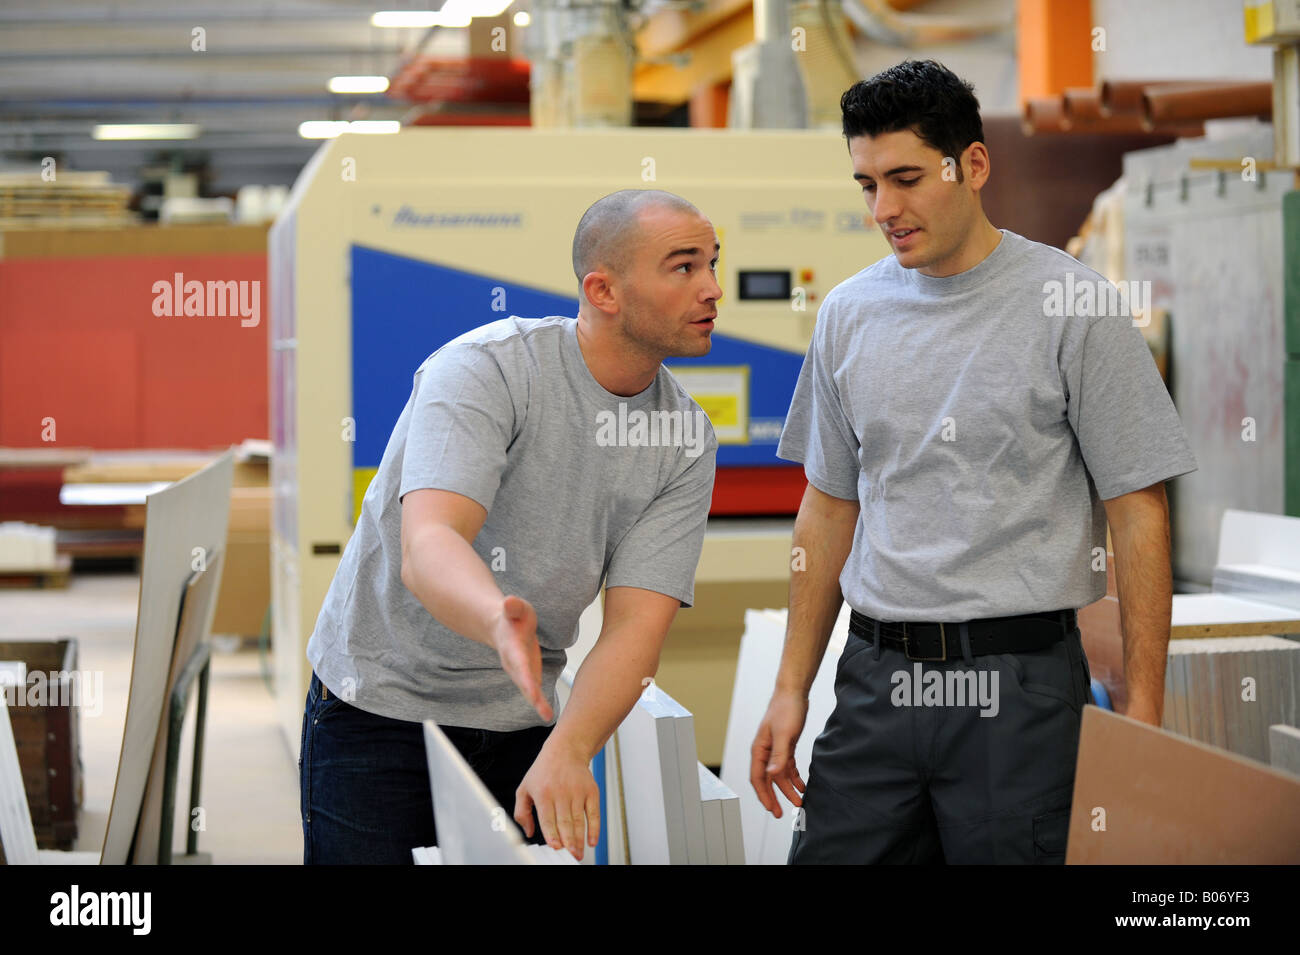 Workers in a factory Stock Photo